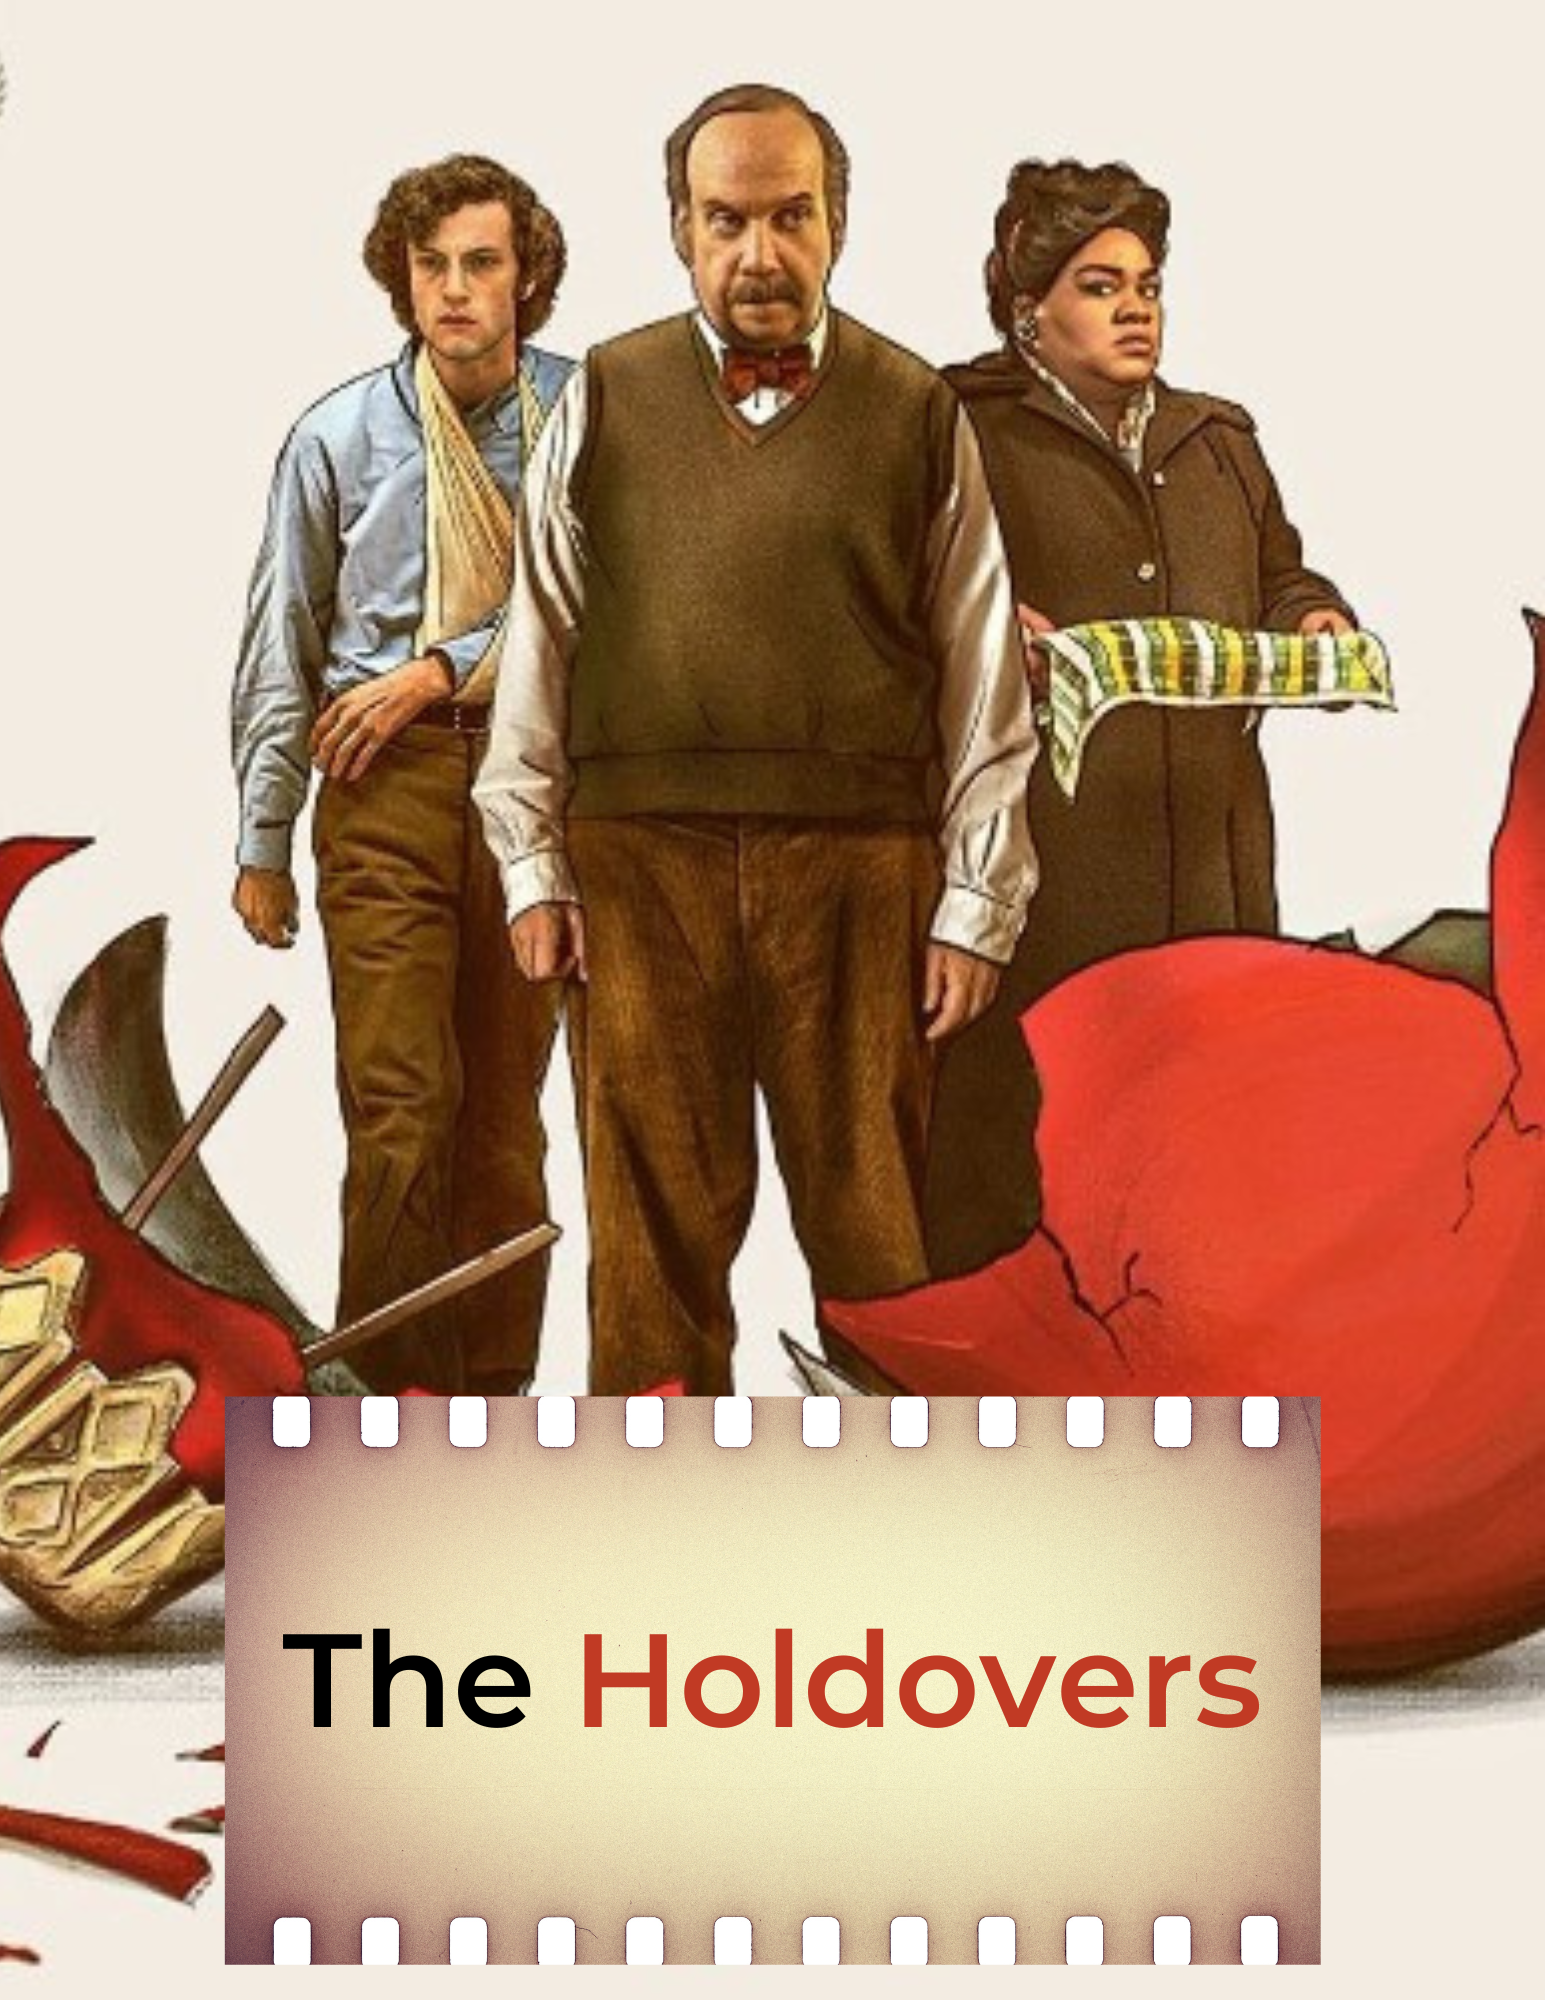 The Holdovers A white man, a black woman and a young man stand near a broken Christmas ornament